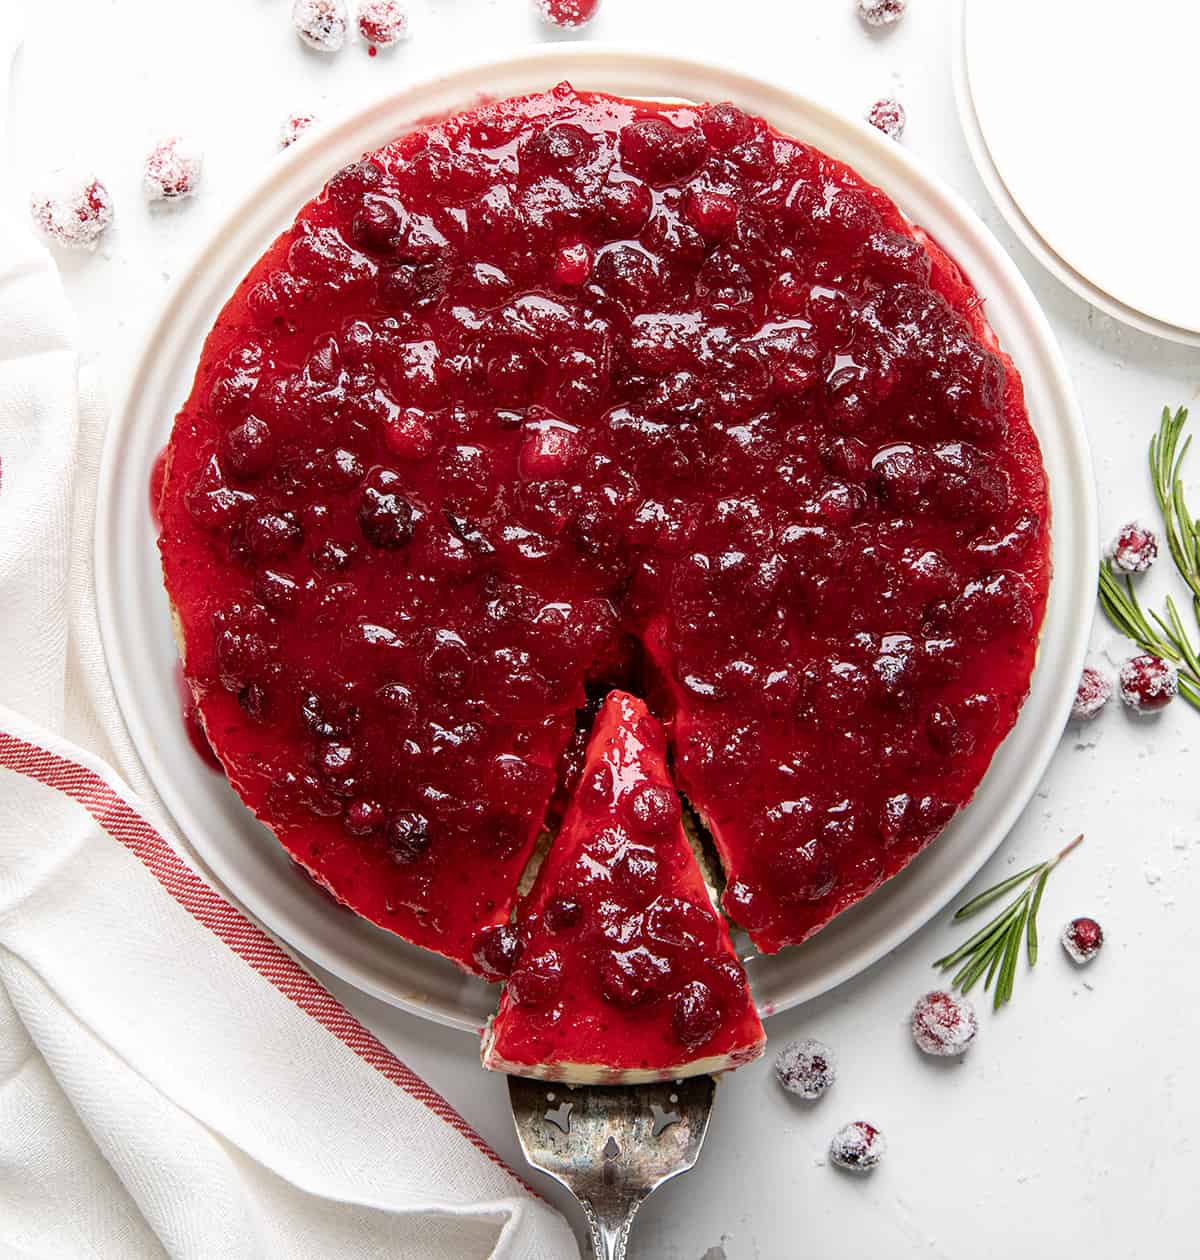 Removing one piece of Cranberry Cheesecake from serving plate from overhead.